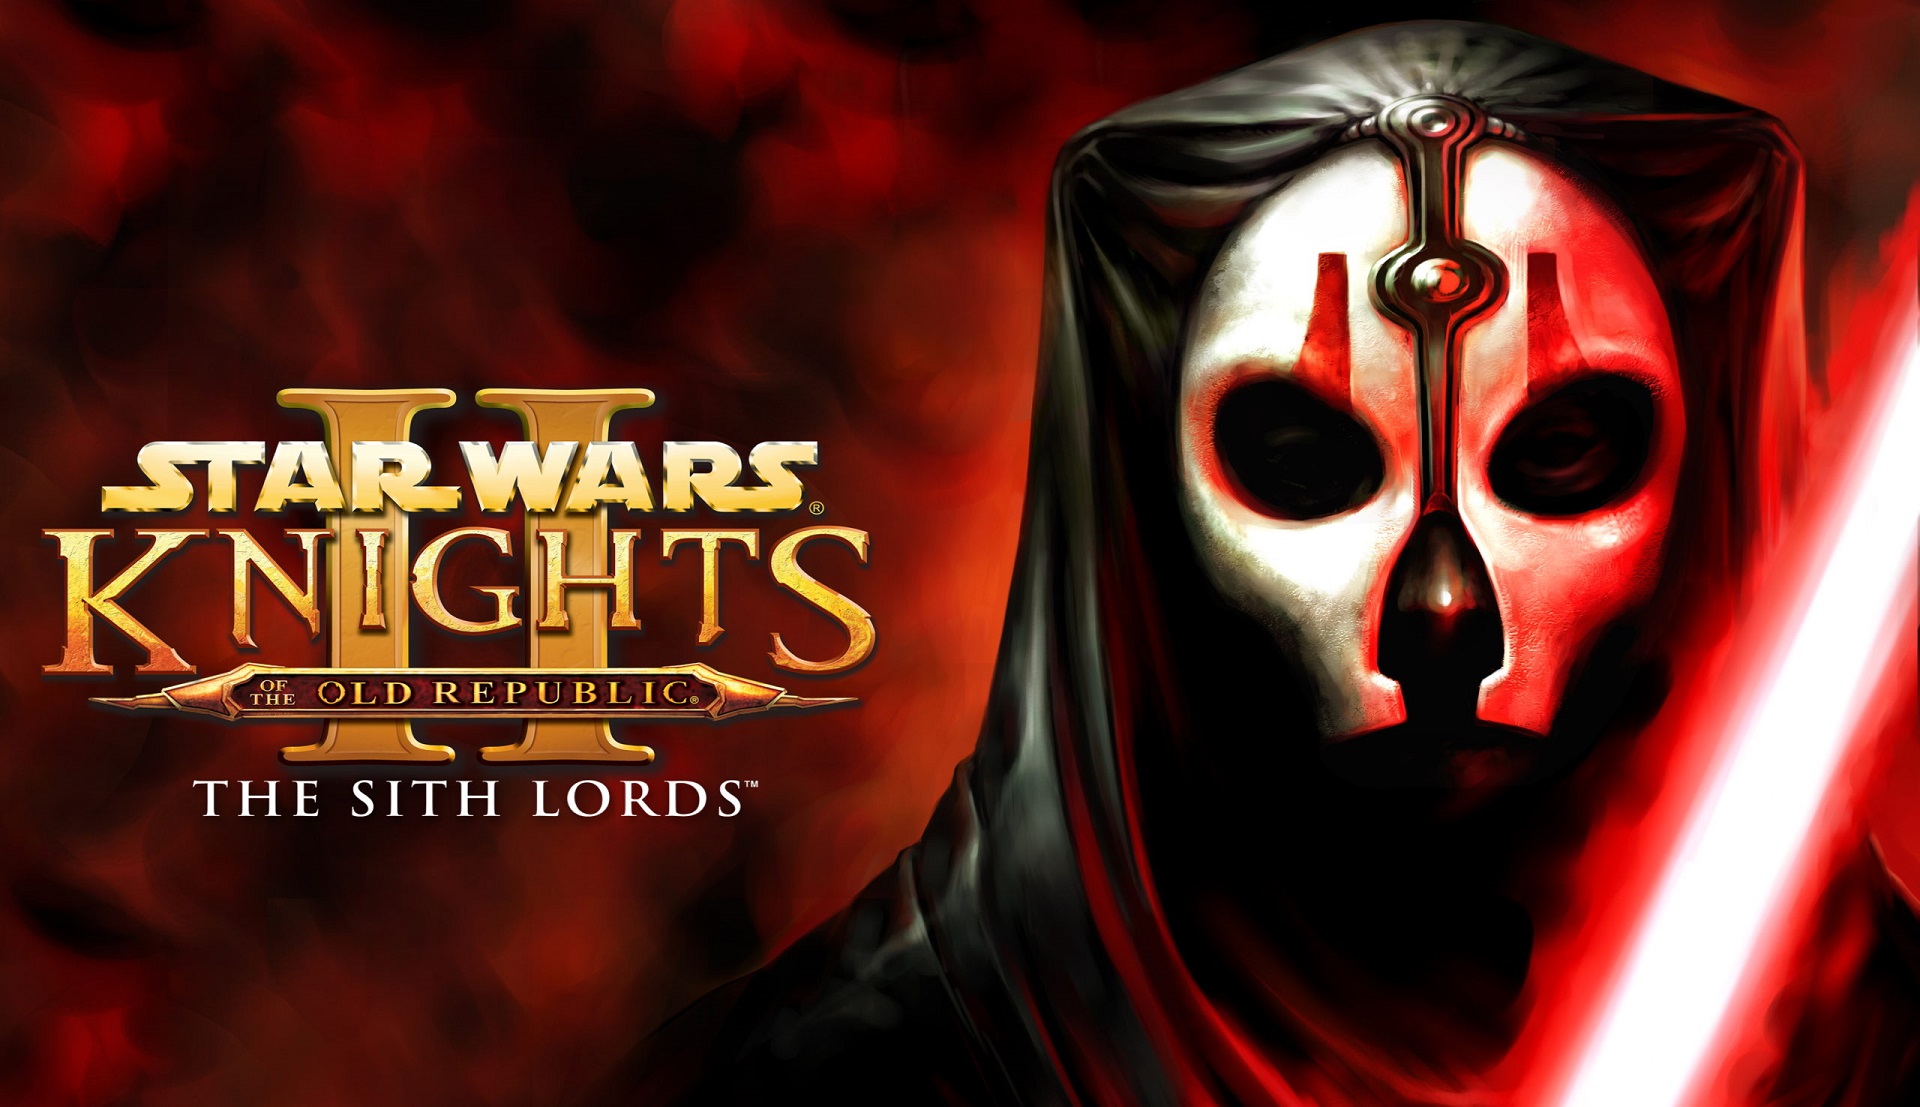 Star wars knights of the old republic русификатор для steam фото 19